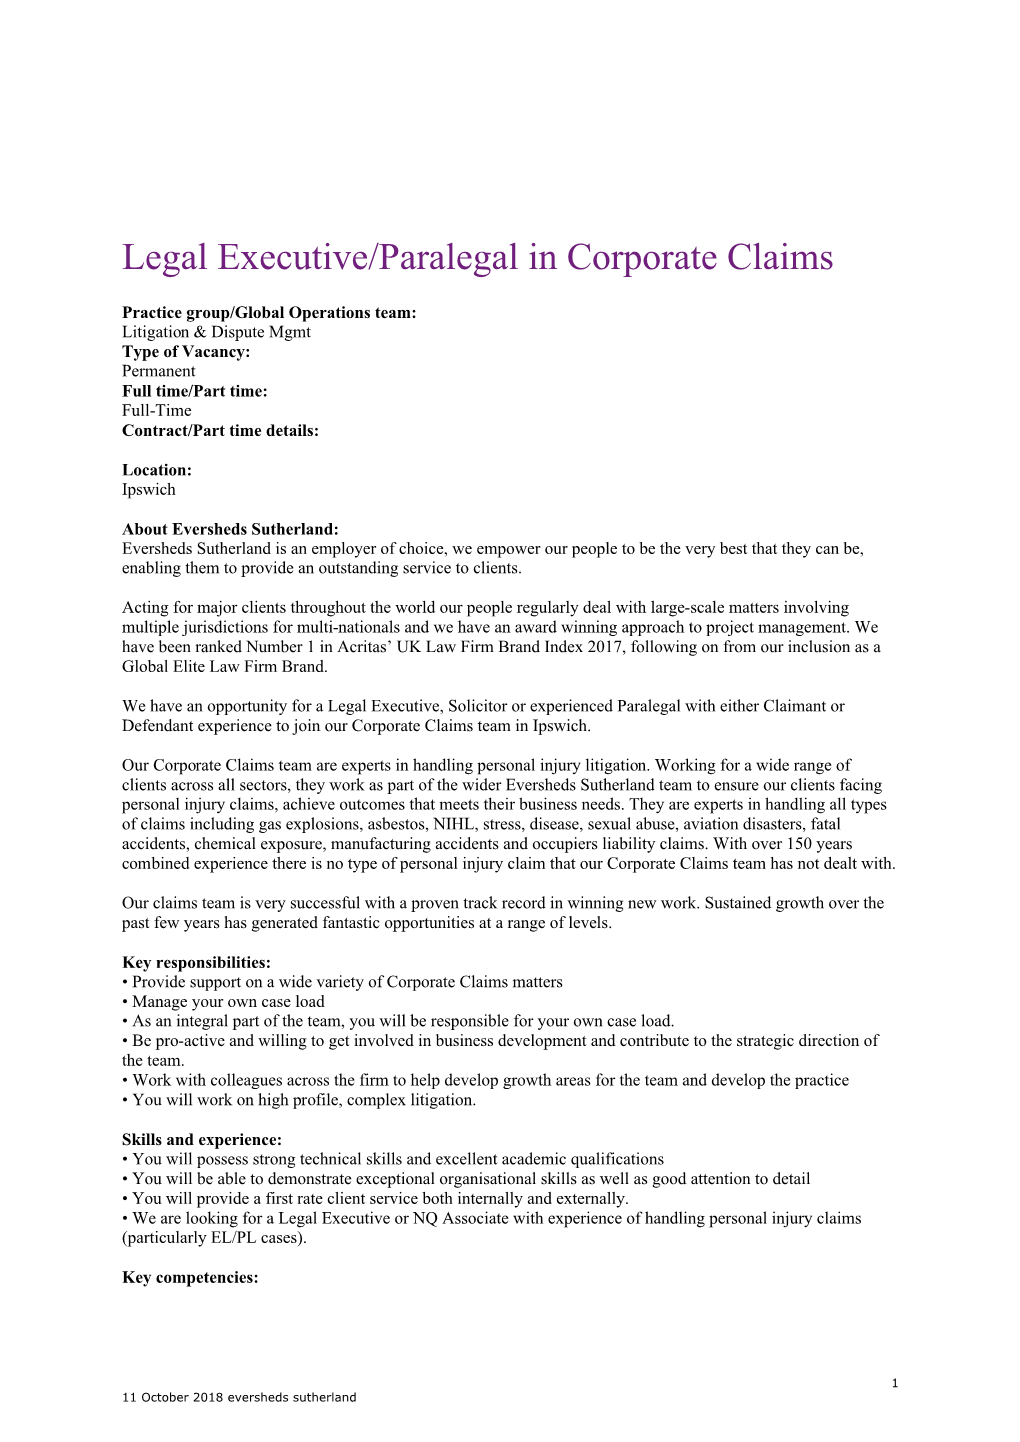 Legal Executive/Paralegal in Corporate Claims